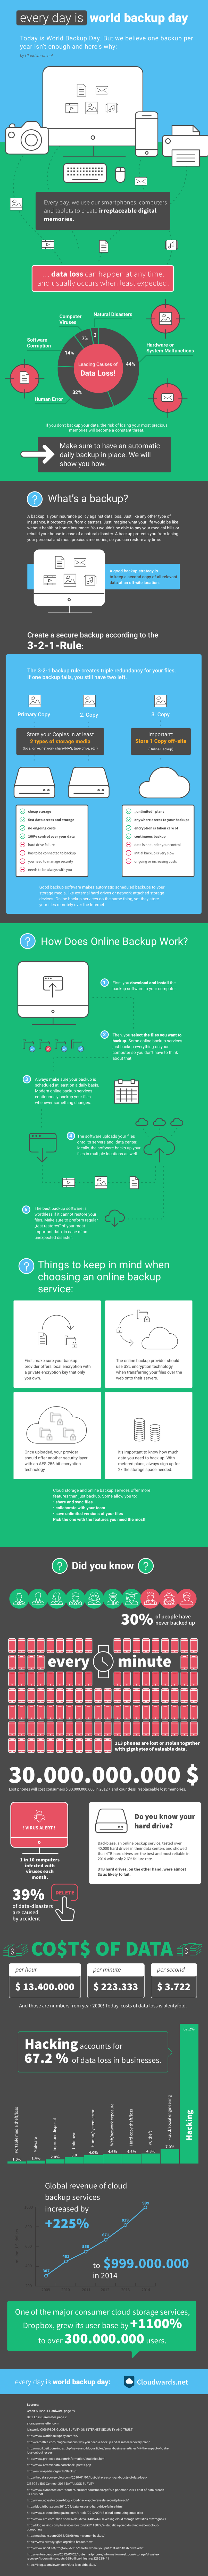 Every Day is World Backup Day